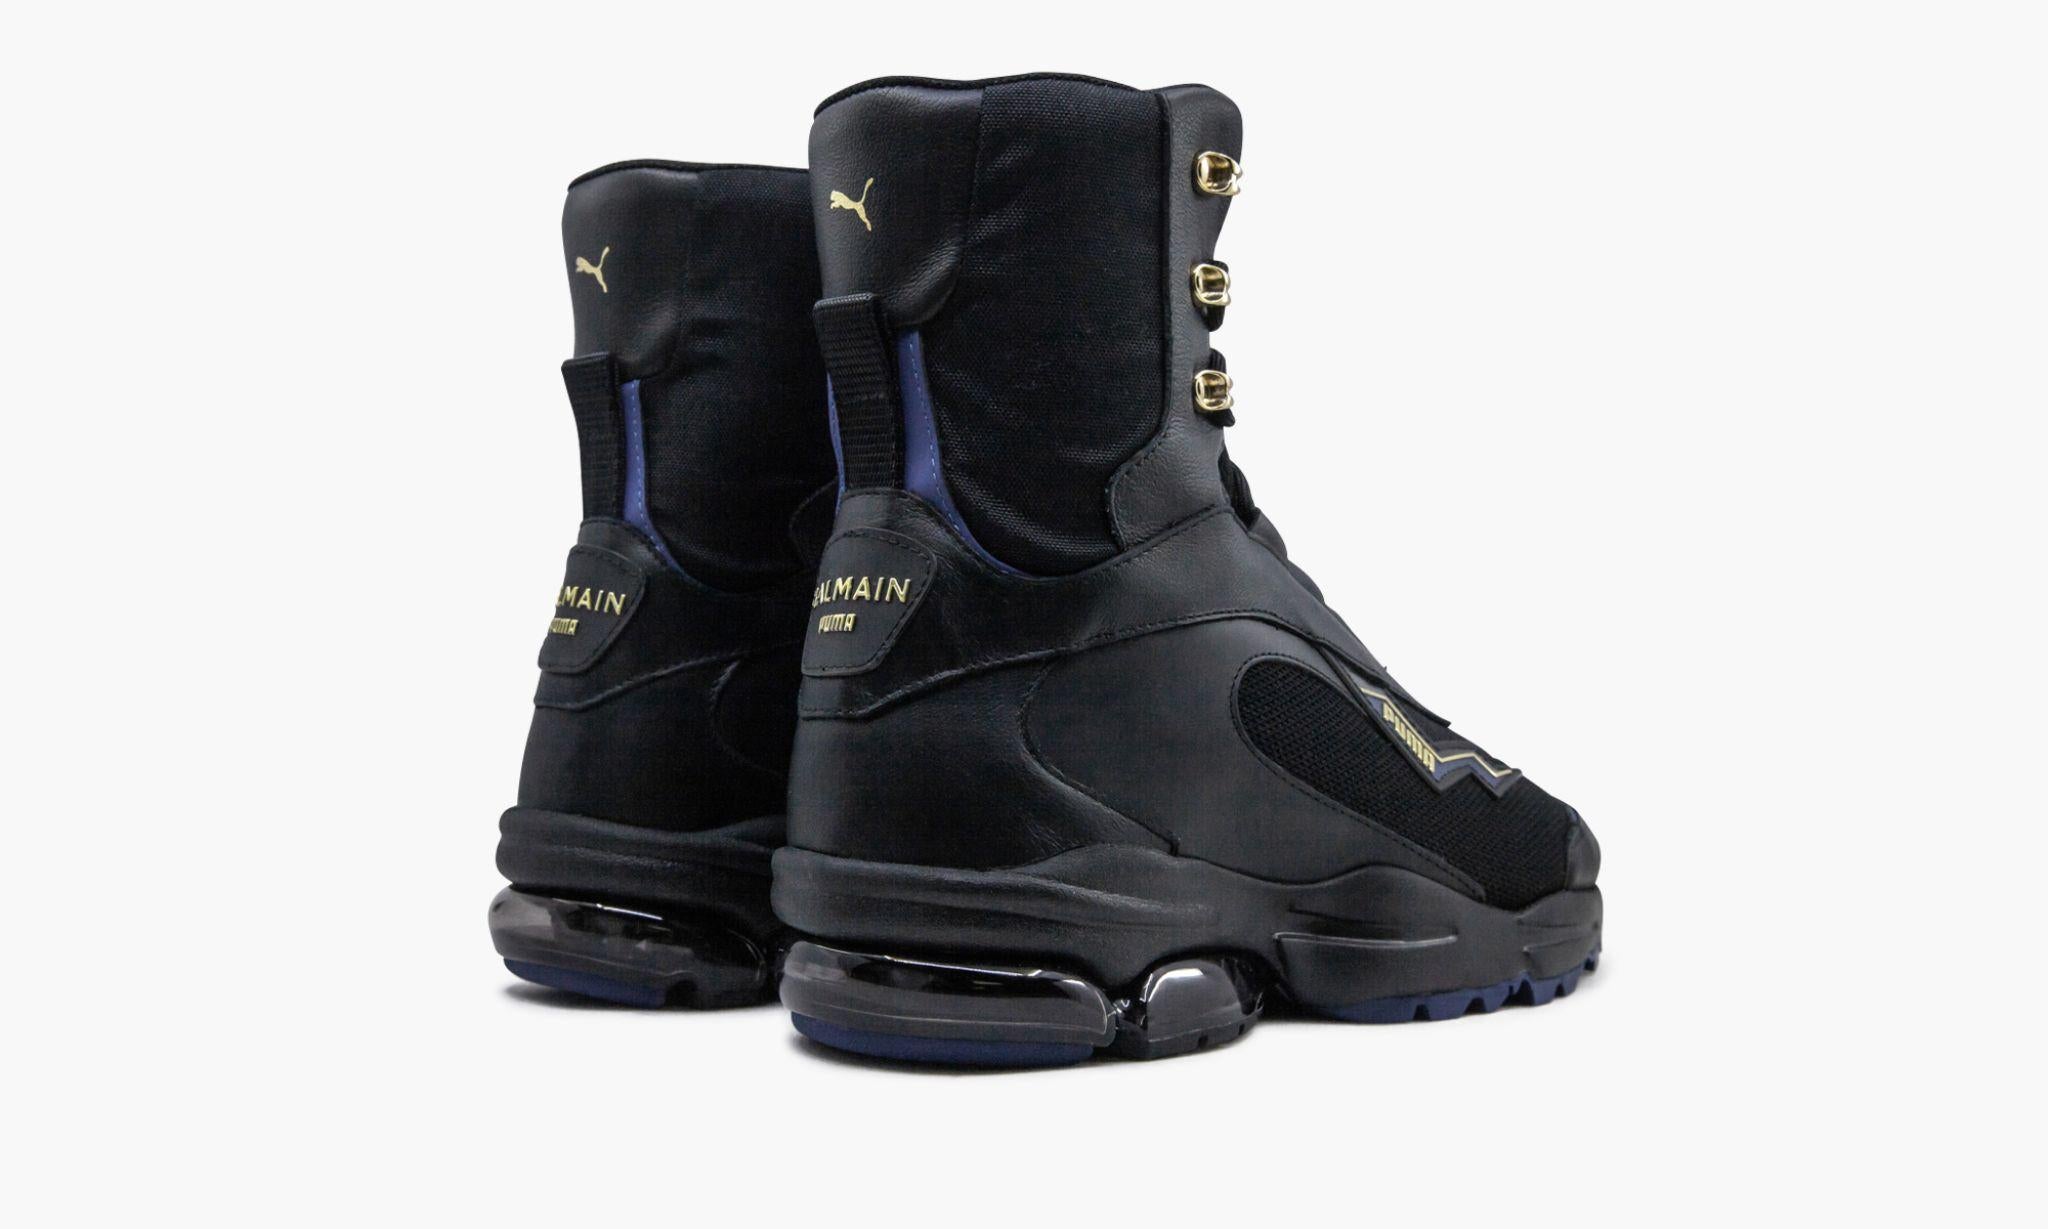 NEW Balmain Limited Edition Black & Blue High Top Leather Combat Boots 36 For Sale 2